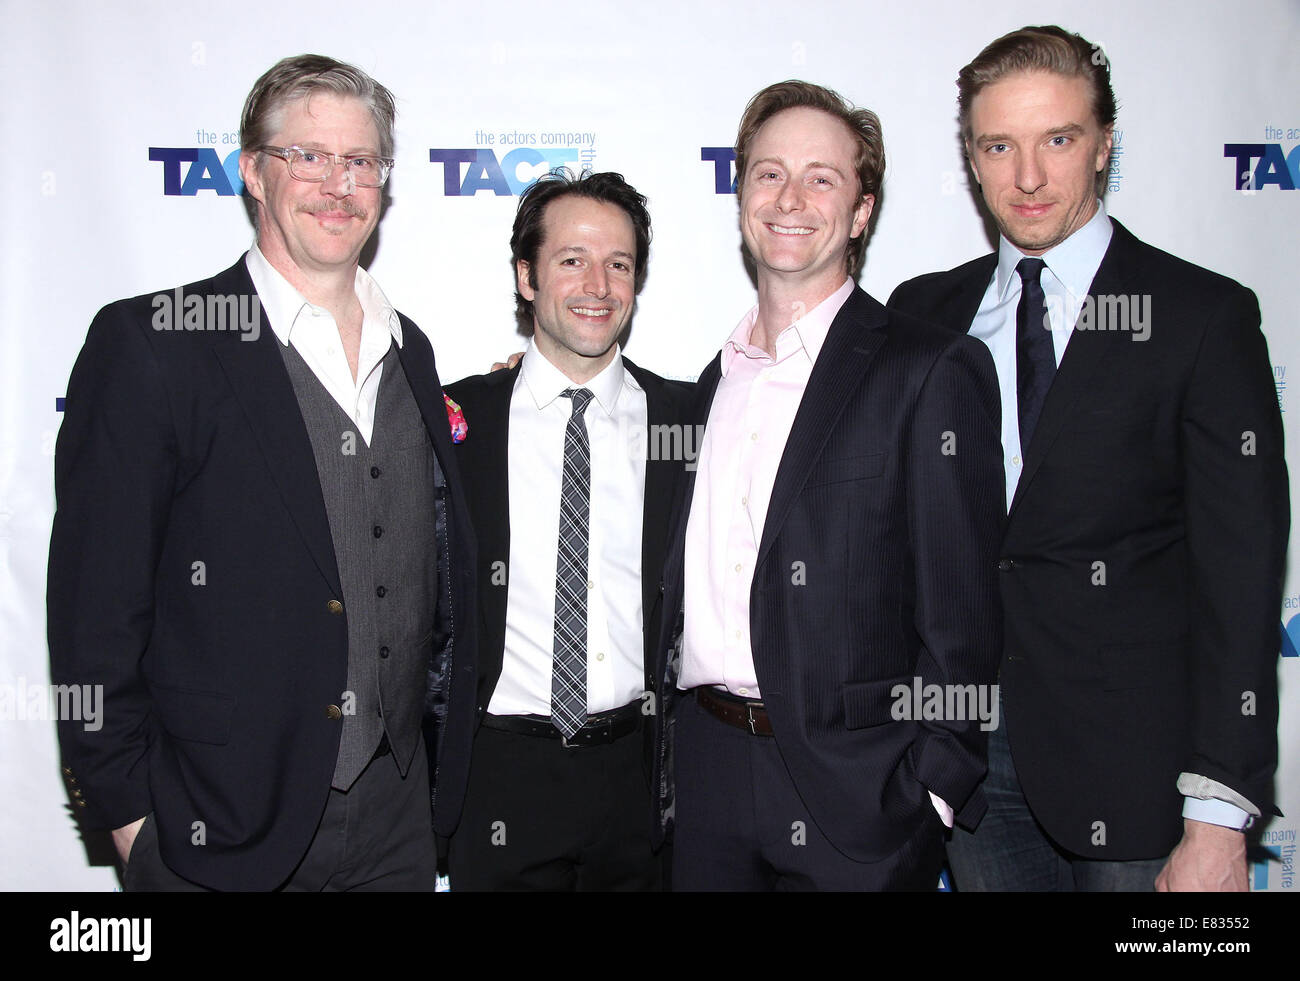 Opening night party for 'Beyond Therapy' at the Beckett Theatre - Arrivals.  Featuring: Karl Kenzler,Mark Alhadeff,Jeffrey C. Hawkins,Michael Schantz Where: New York, New York, United States When: 25 Mar 2014 Stock Photo